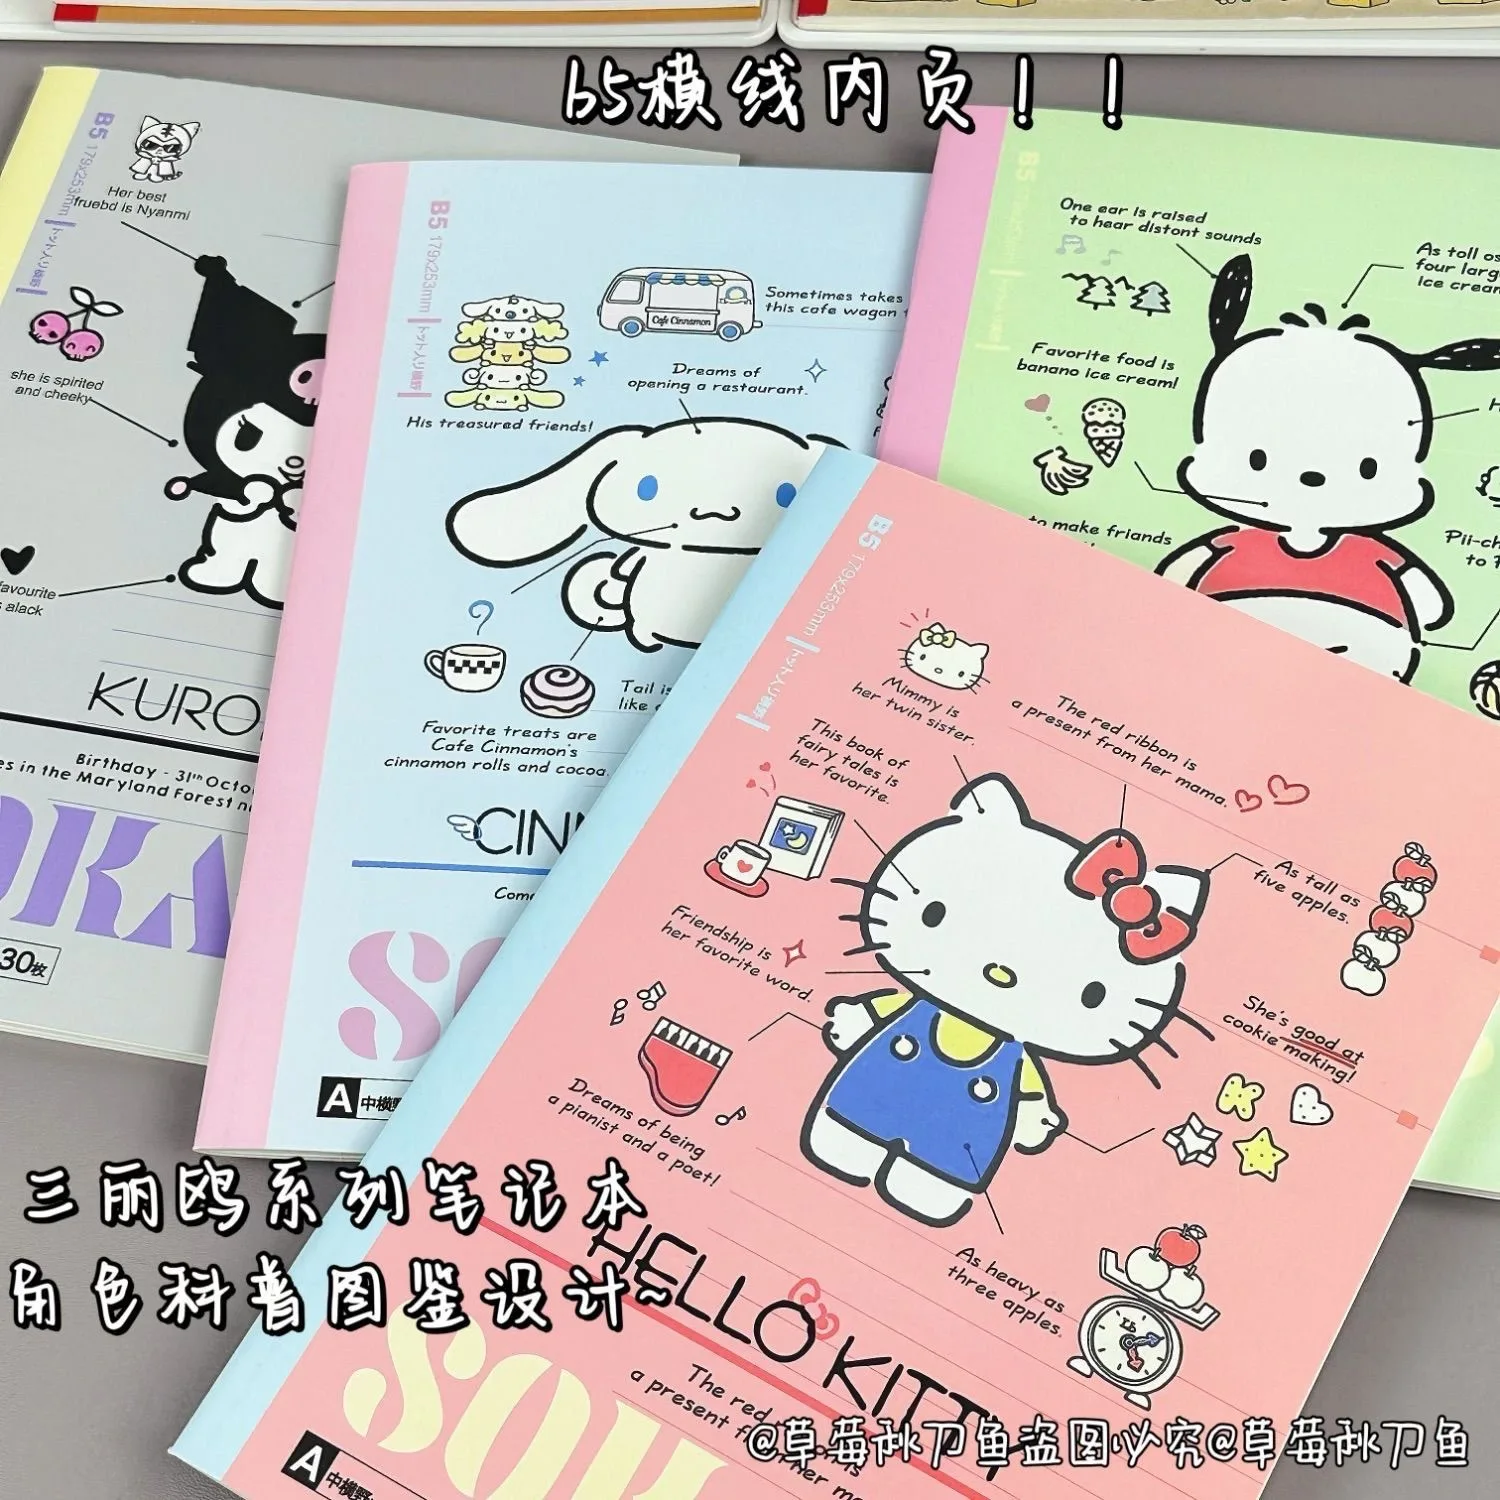 Sanrio Hello Kitty Notebook Melody Cinnamoroll Kuromi B5 Cartoon Kawaii Portable Notebook Diary Children Handbook Notepad Gift 46pcs box let s go camping retro style suitable for decorative stickers diy diary notebook scrapbook children s stationery